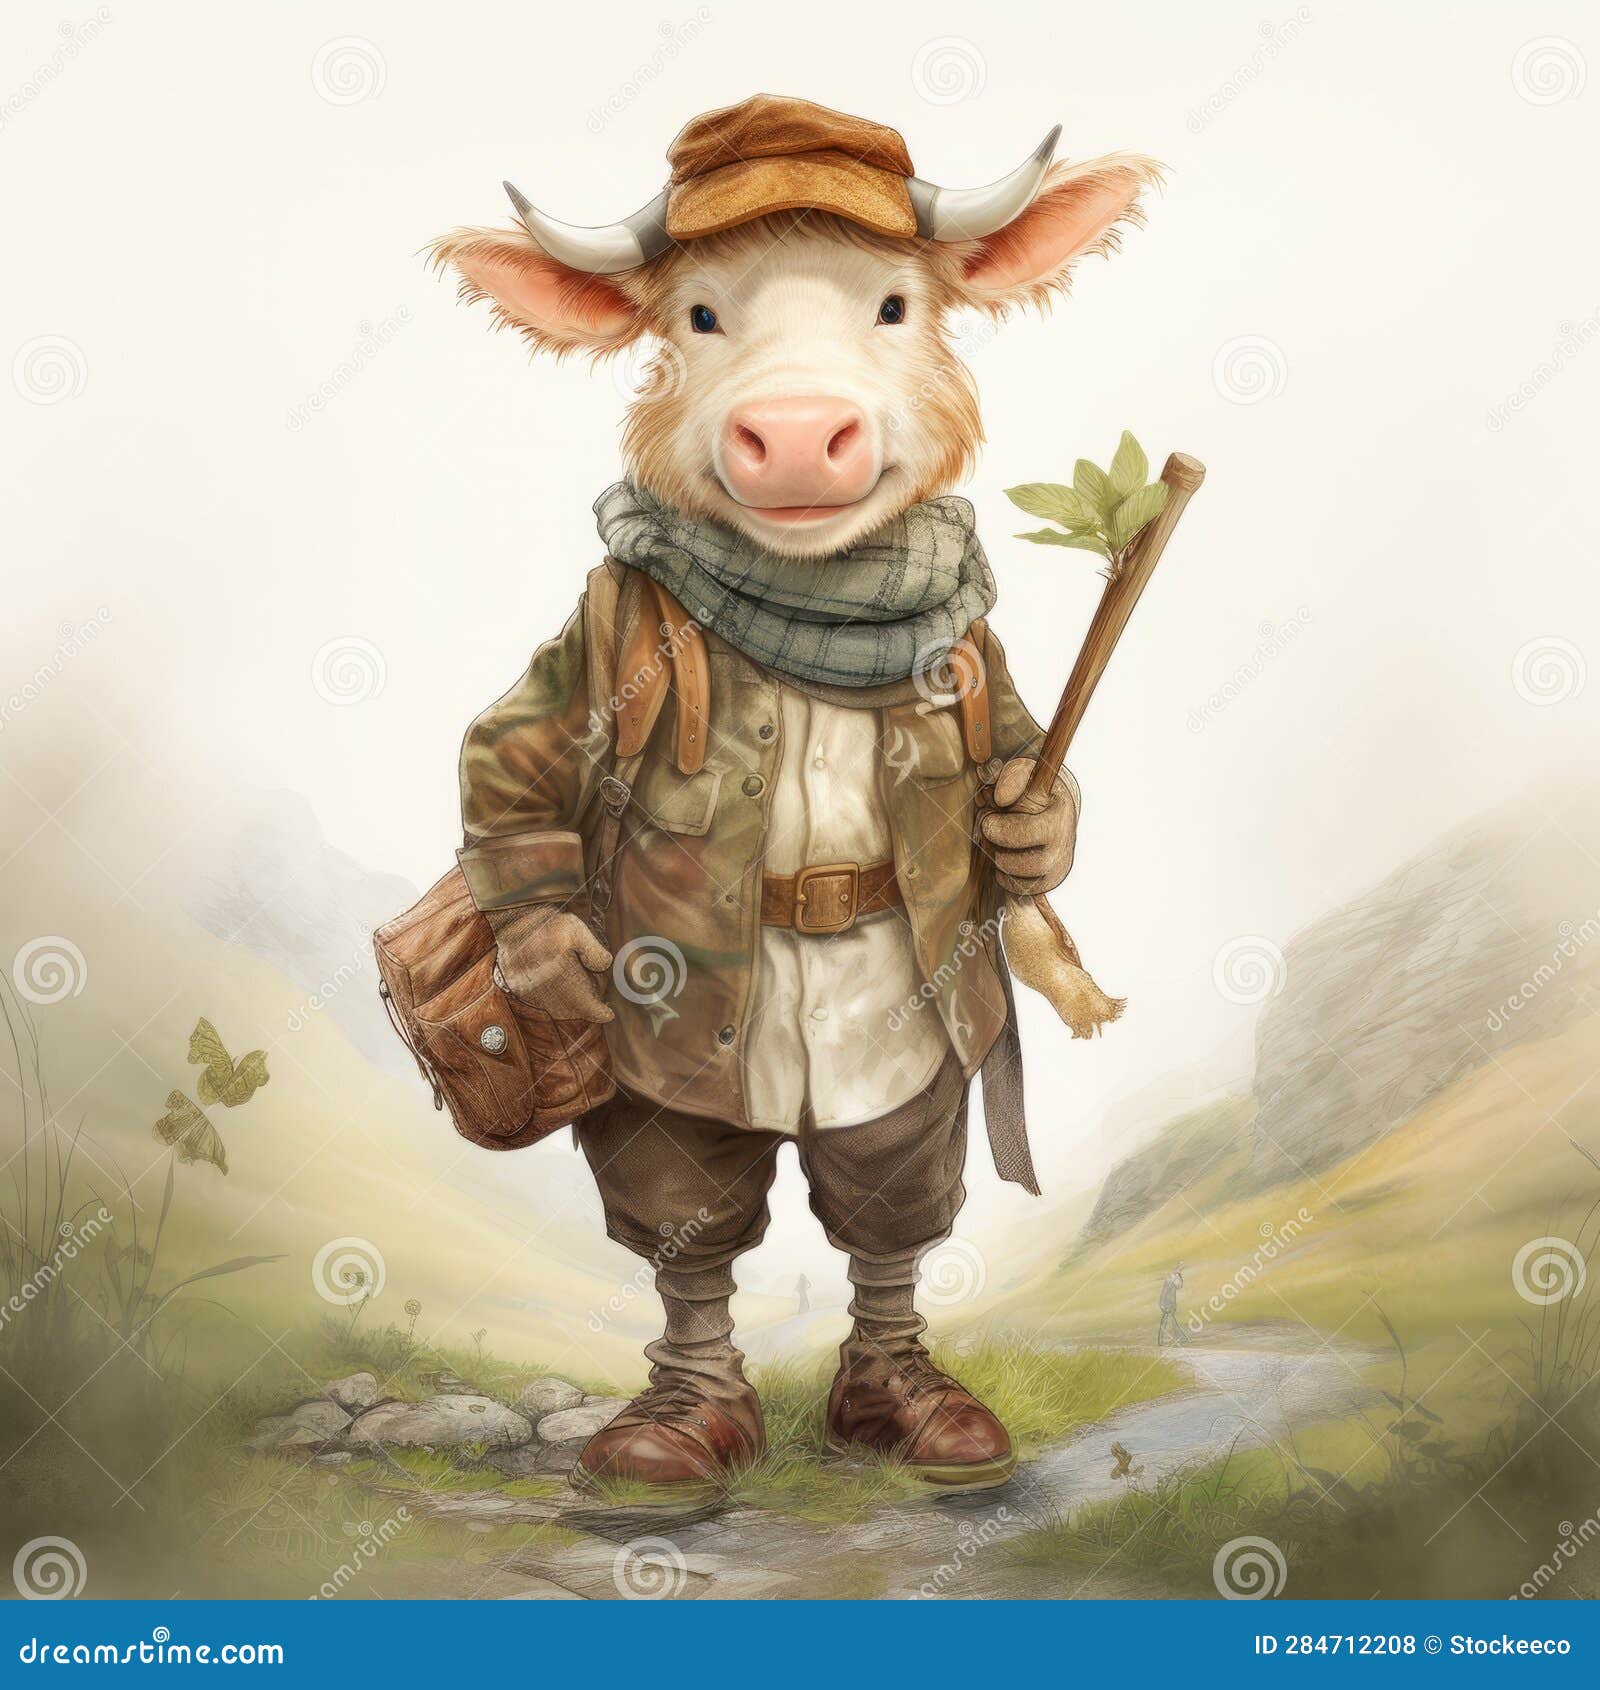 anthropomorphic cow adventurer: digital painting inspired by beatrix potter